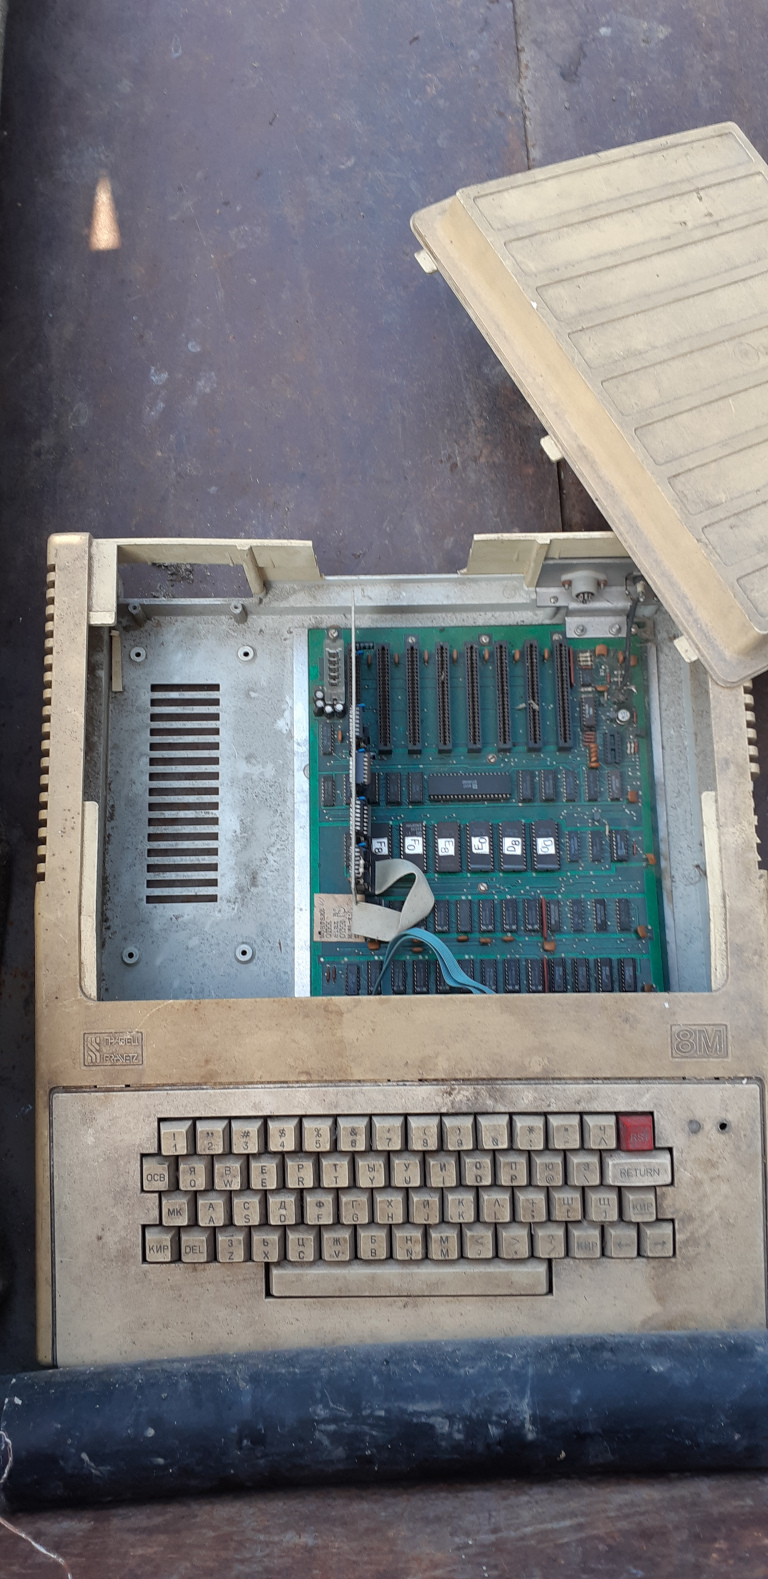 Old computer, known as Pravets 8M